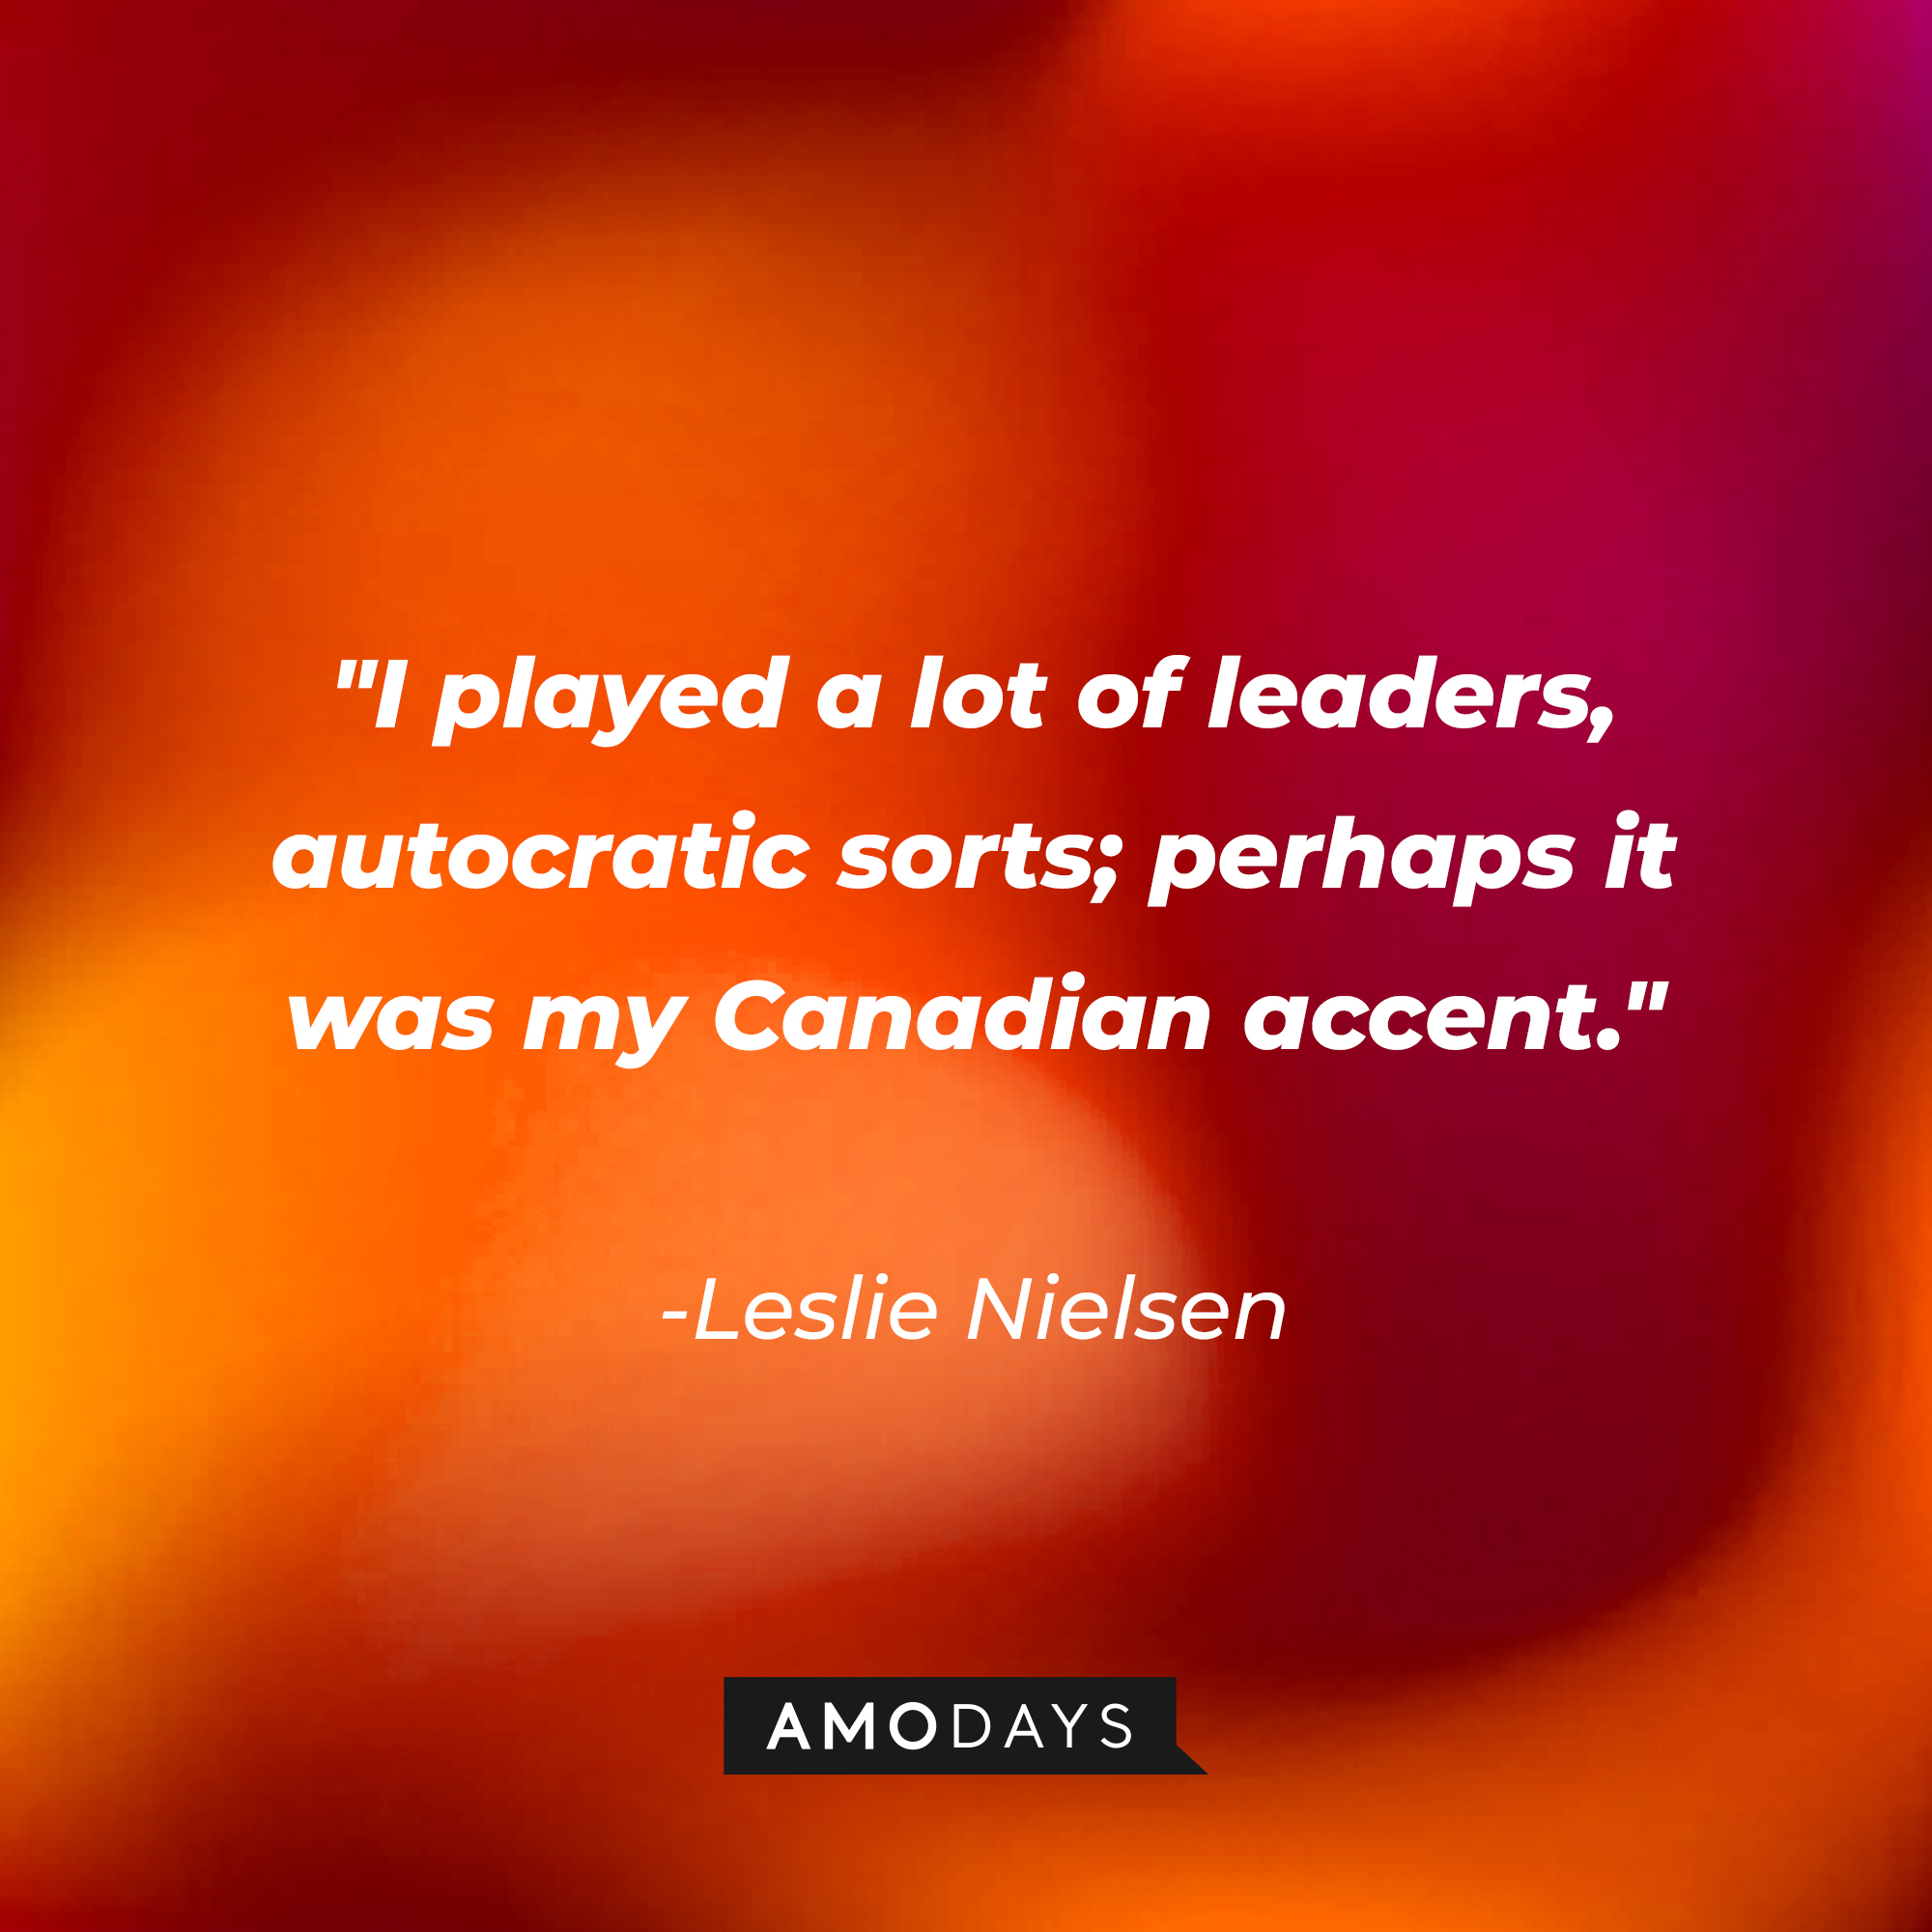 Leslie Nielsen's quote: "I played a lot of leaders, autocratic sorts; perhaps it was my Canadian accent." | Source: Amodays